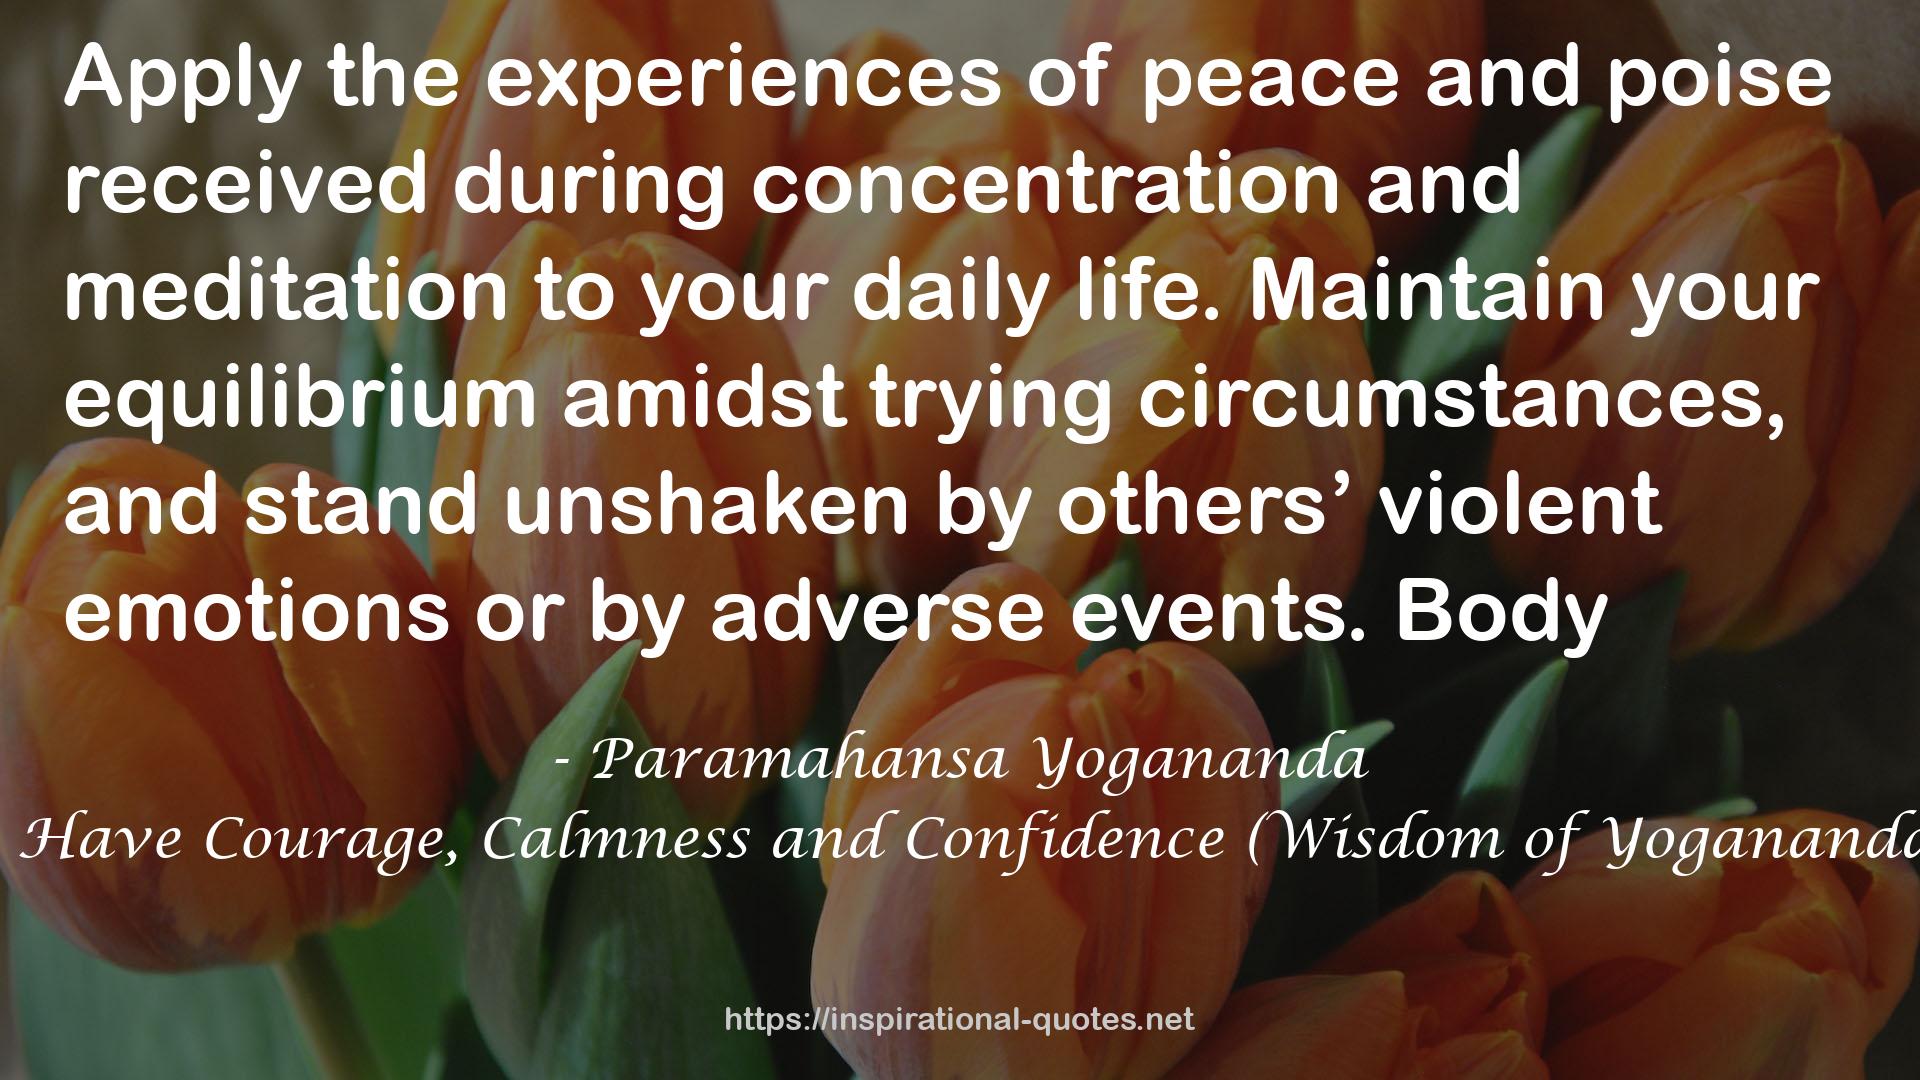 How to Have Courage, Calmness and Confidence (Wisdom of Yogananda, Vol 5) QUOTES